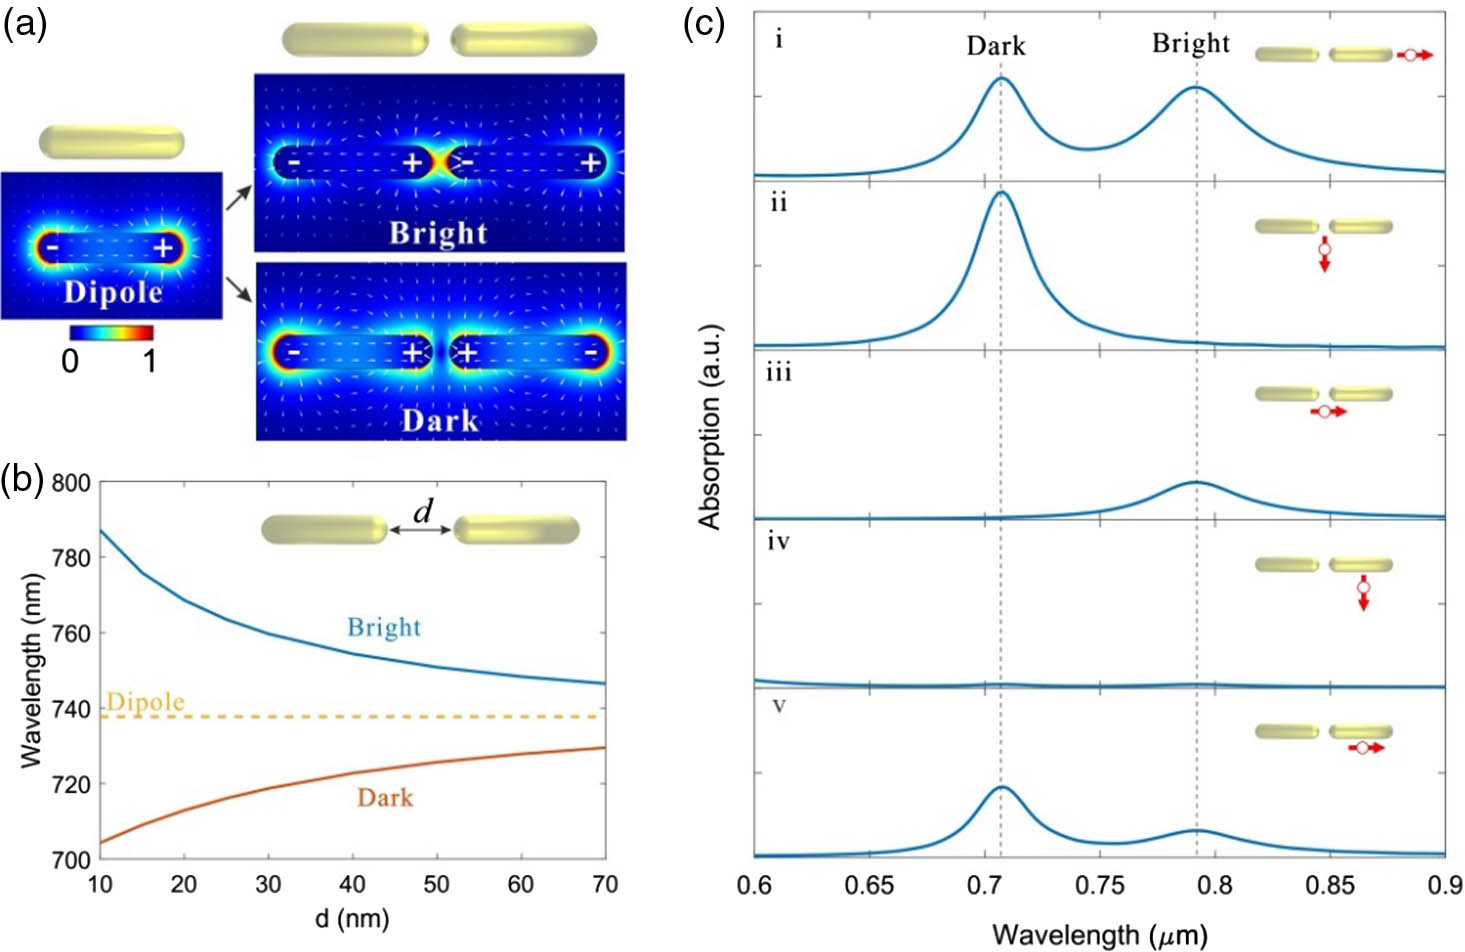 Au nanorod dimer excitation with an electric dipole. (a) Mode profile and surface charge distribution of a longitudinal dipole mode in a single Au nanorod and hybridized bright and dark modes in a nanorod dimer; (b) resonant wavelengths of bright and dark modes as a function of dimer spacing d. The yellow dashed line denotes the resonant wavelength of a dipole mode in a single rod. The length and diameter of each nanorod are 95 and 20 nm, respectively. (c) Absorption spectra of the Au nanorod dimer under different electric dipole excitation conditions. The dimer spacing d is 10 nm. The electric dipole is located 20 nm away from the Au nanorod dimer. The red arrow indicates the electric dipole moment orientation and position relative to the nanorod dimer. The bright and dark modes are located at the wavelengths of 791.0 and 704.3 nm, respectively.